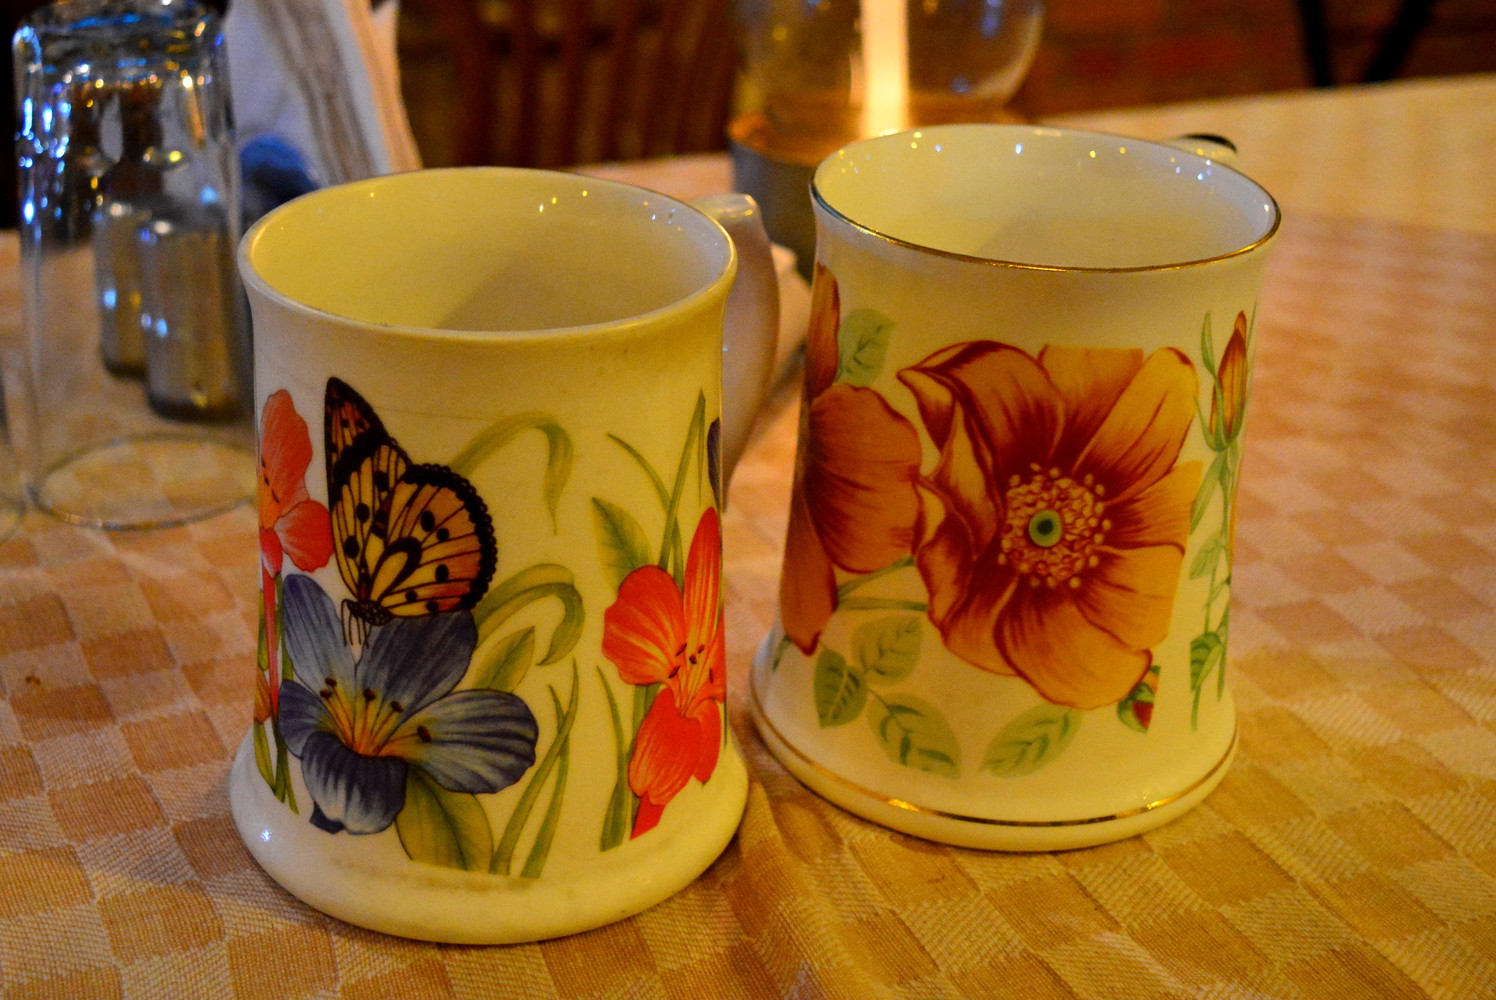 Two porcelain mugs with floral patterns painted on them